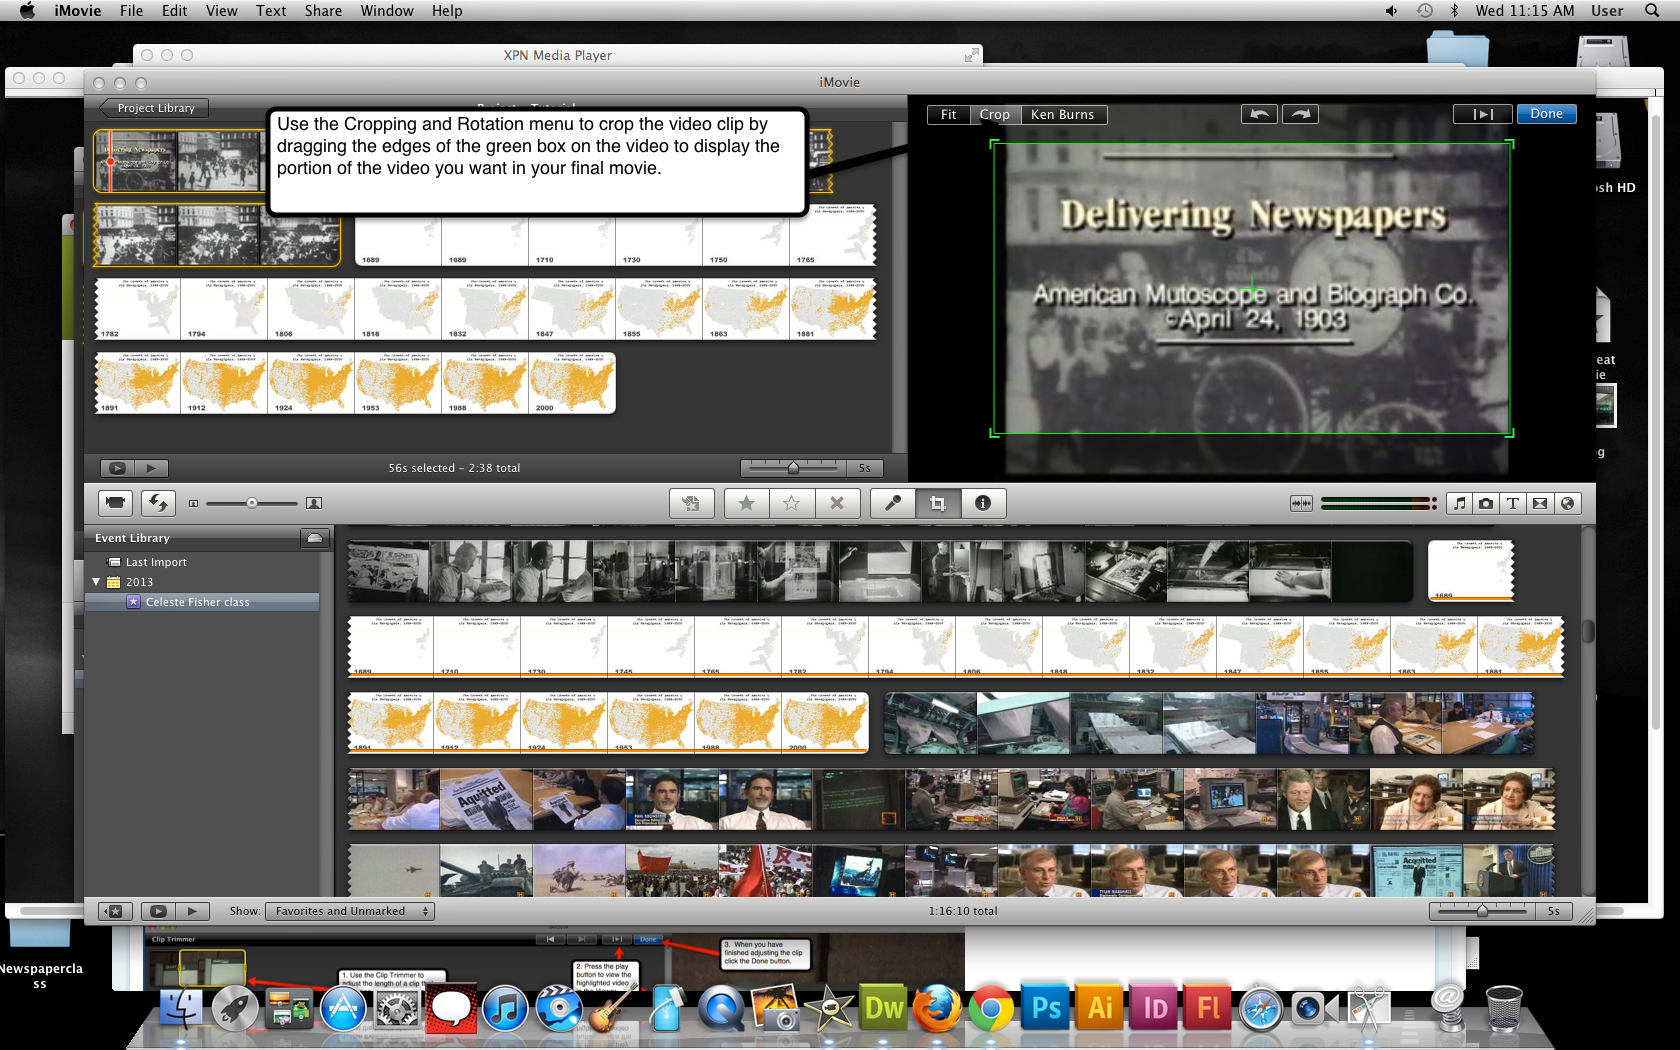 Visual guide on how to edit video in iMovie '11